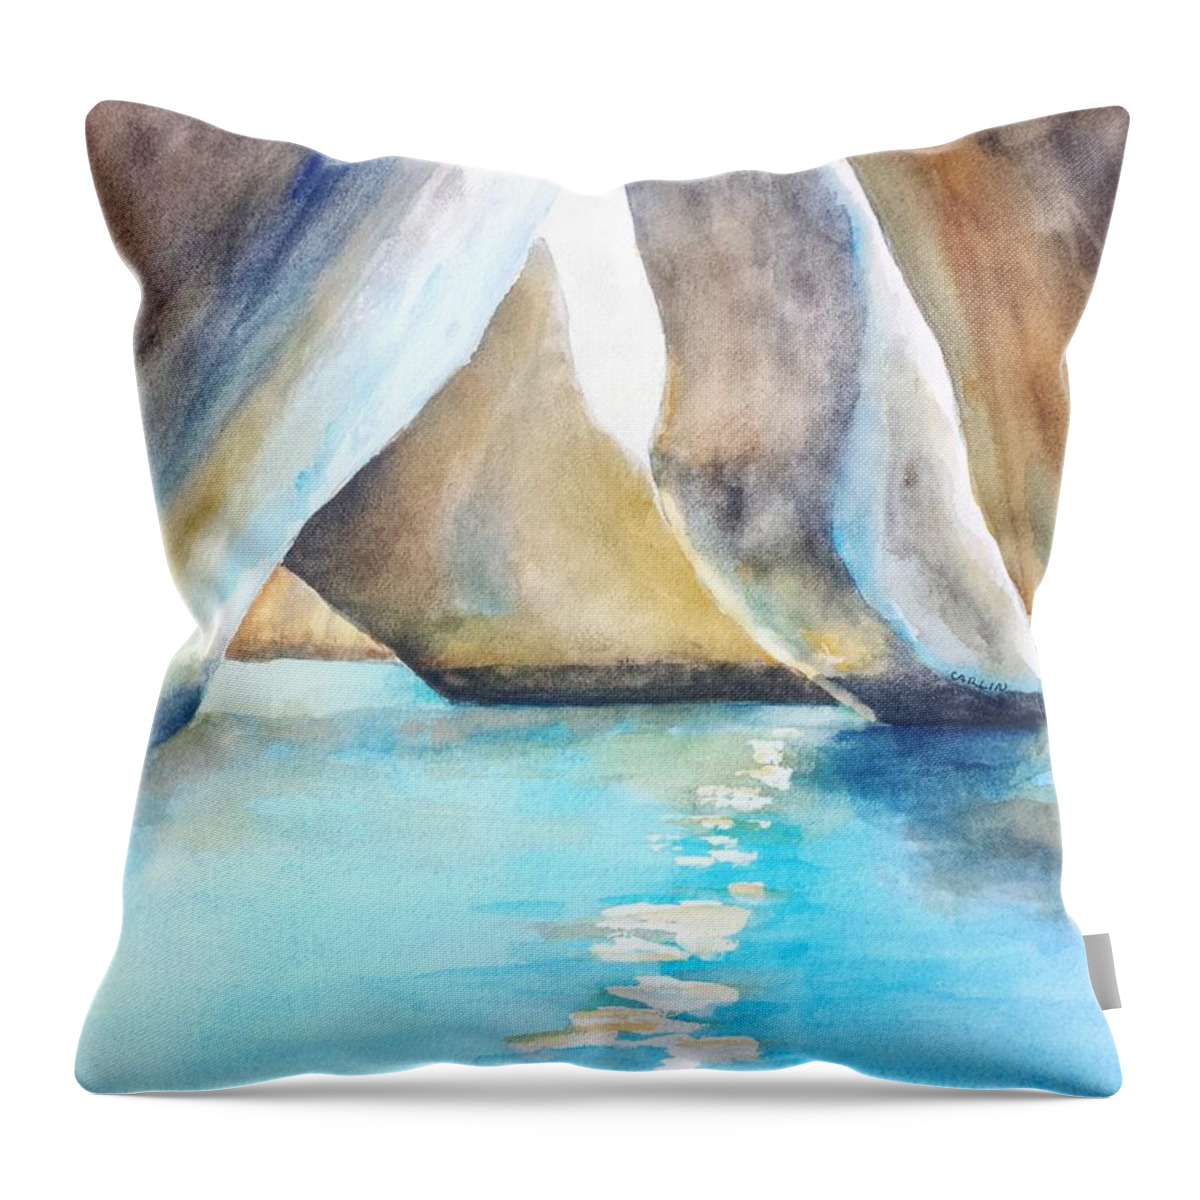 The Bath's Throw Pillow featuring the painting The Baths Water Cave Path by Carlin Blahnik CarlinArtWatercolor